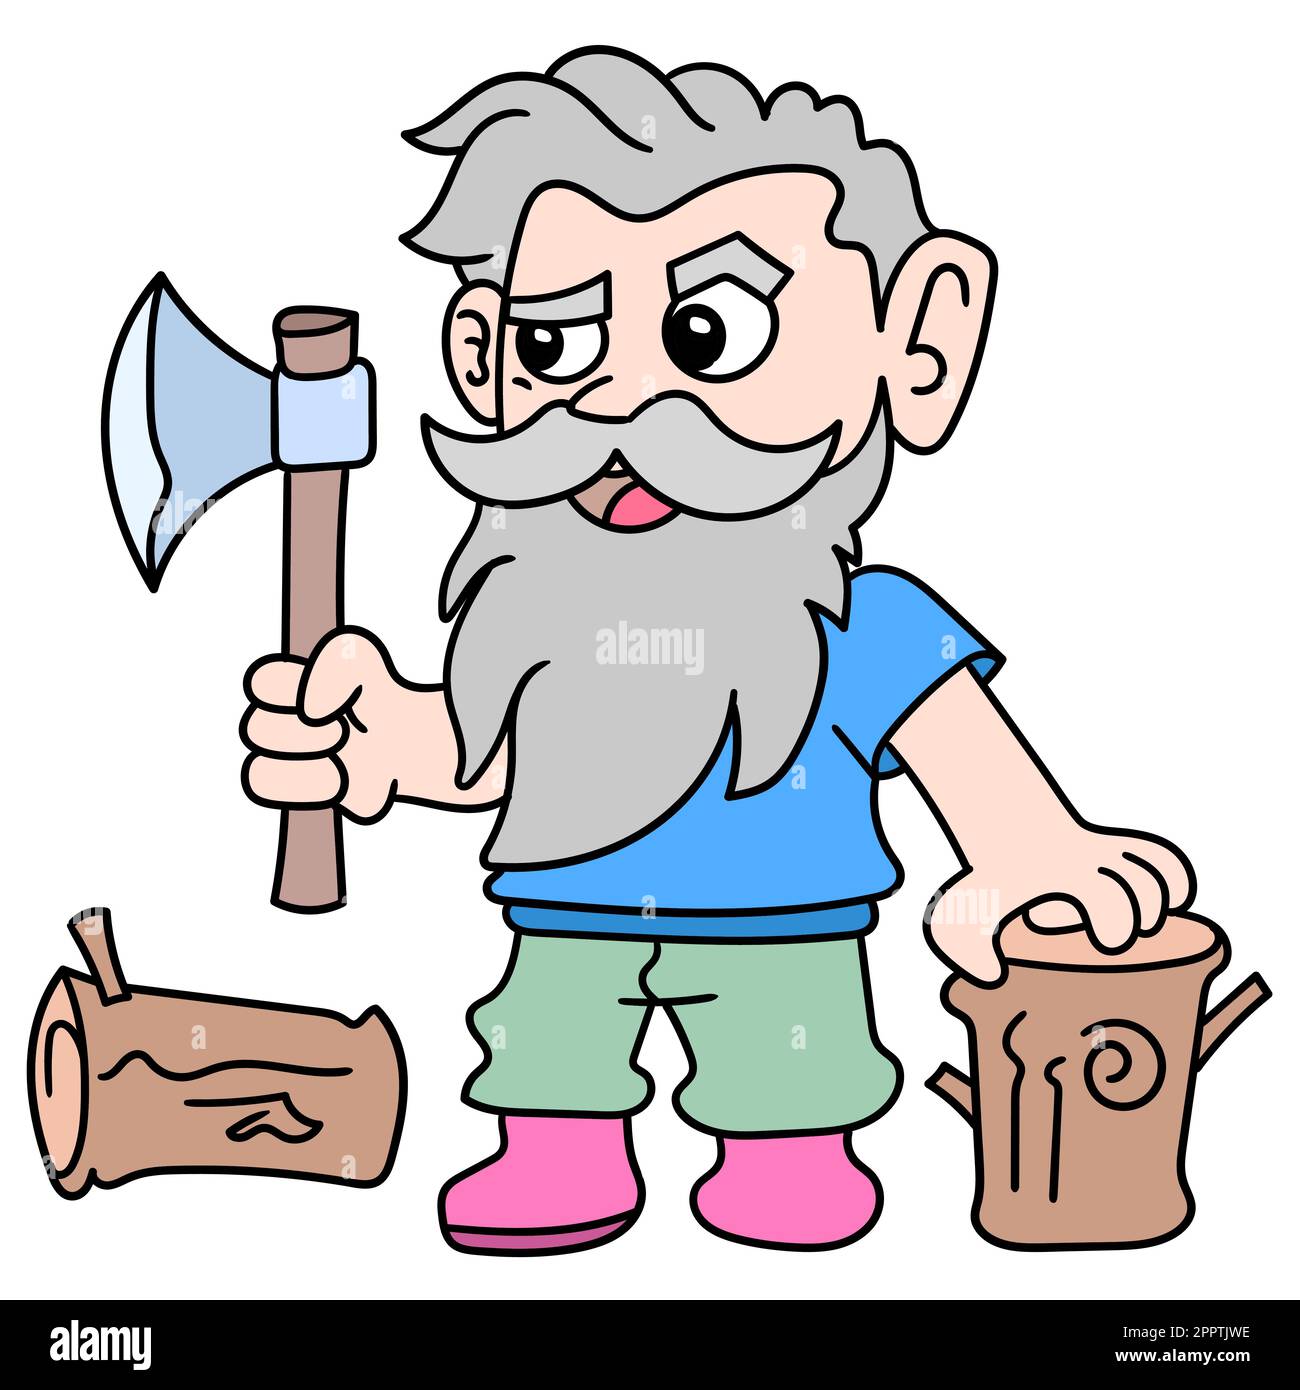 old woodcutter carrying ax chopping wood, doodle icon image kawaii Stock Vector